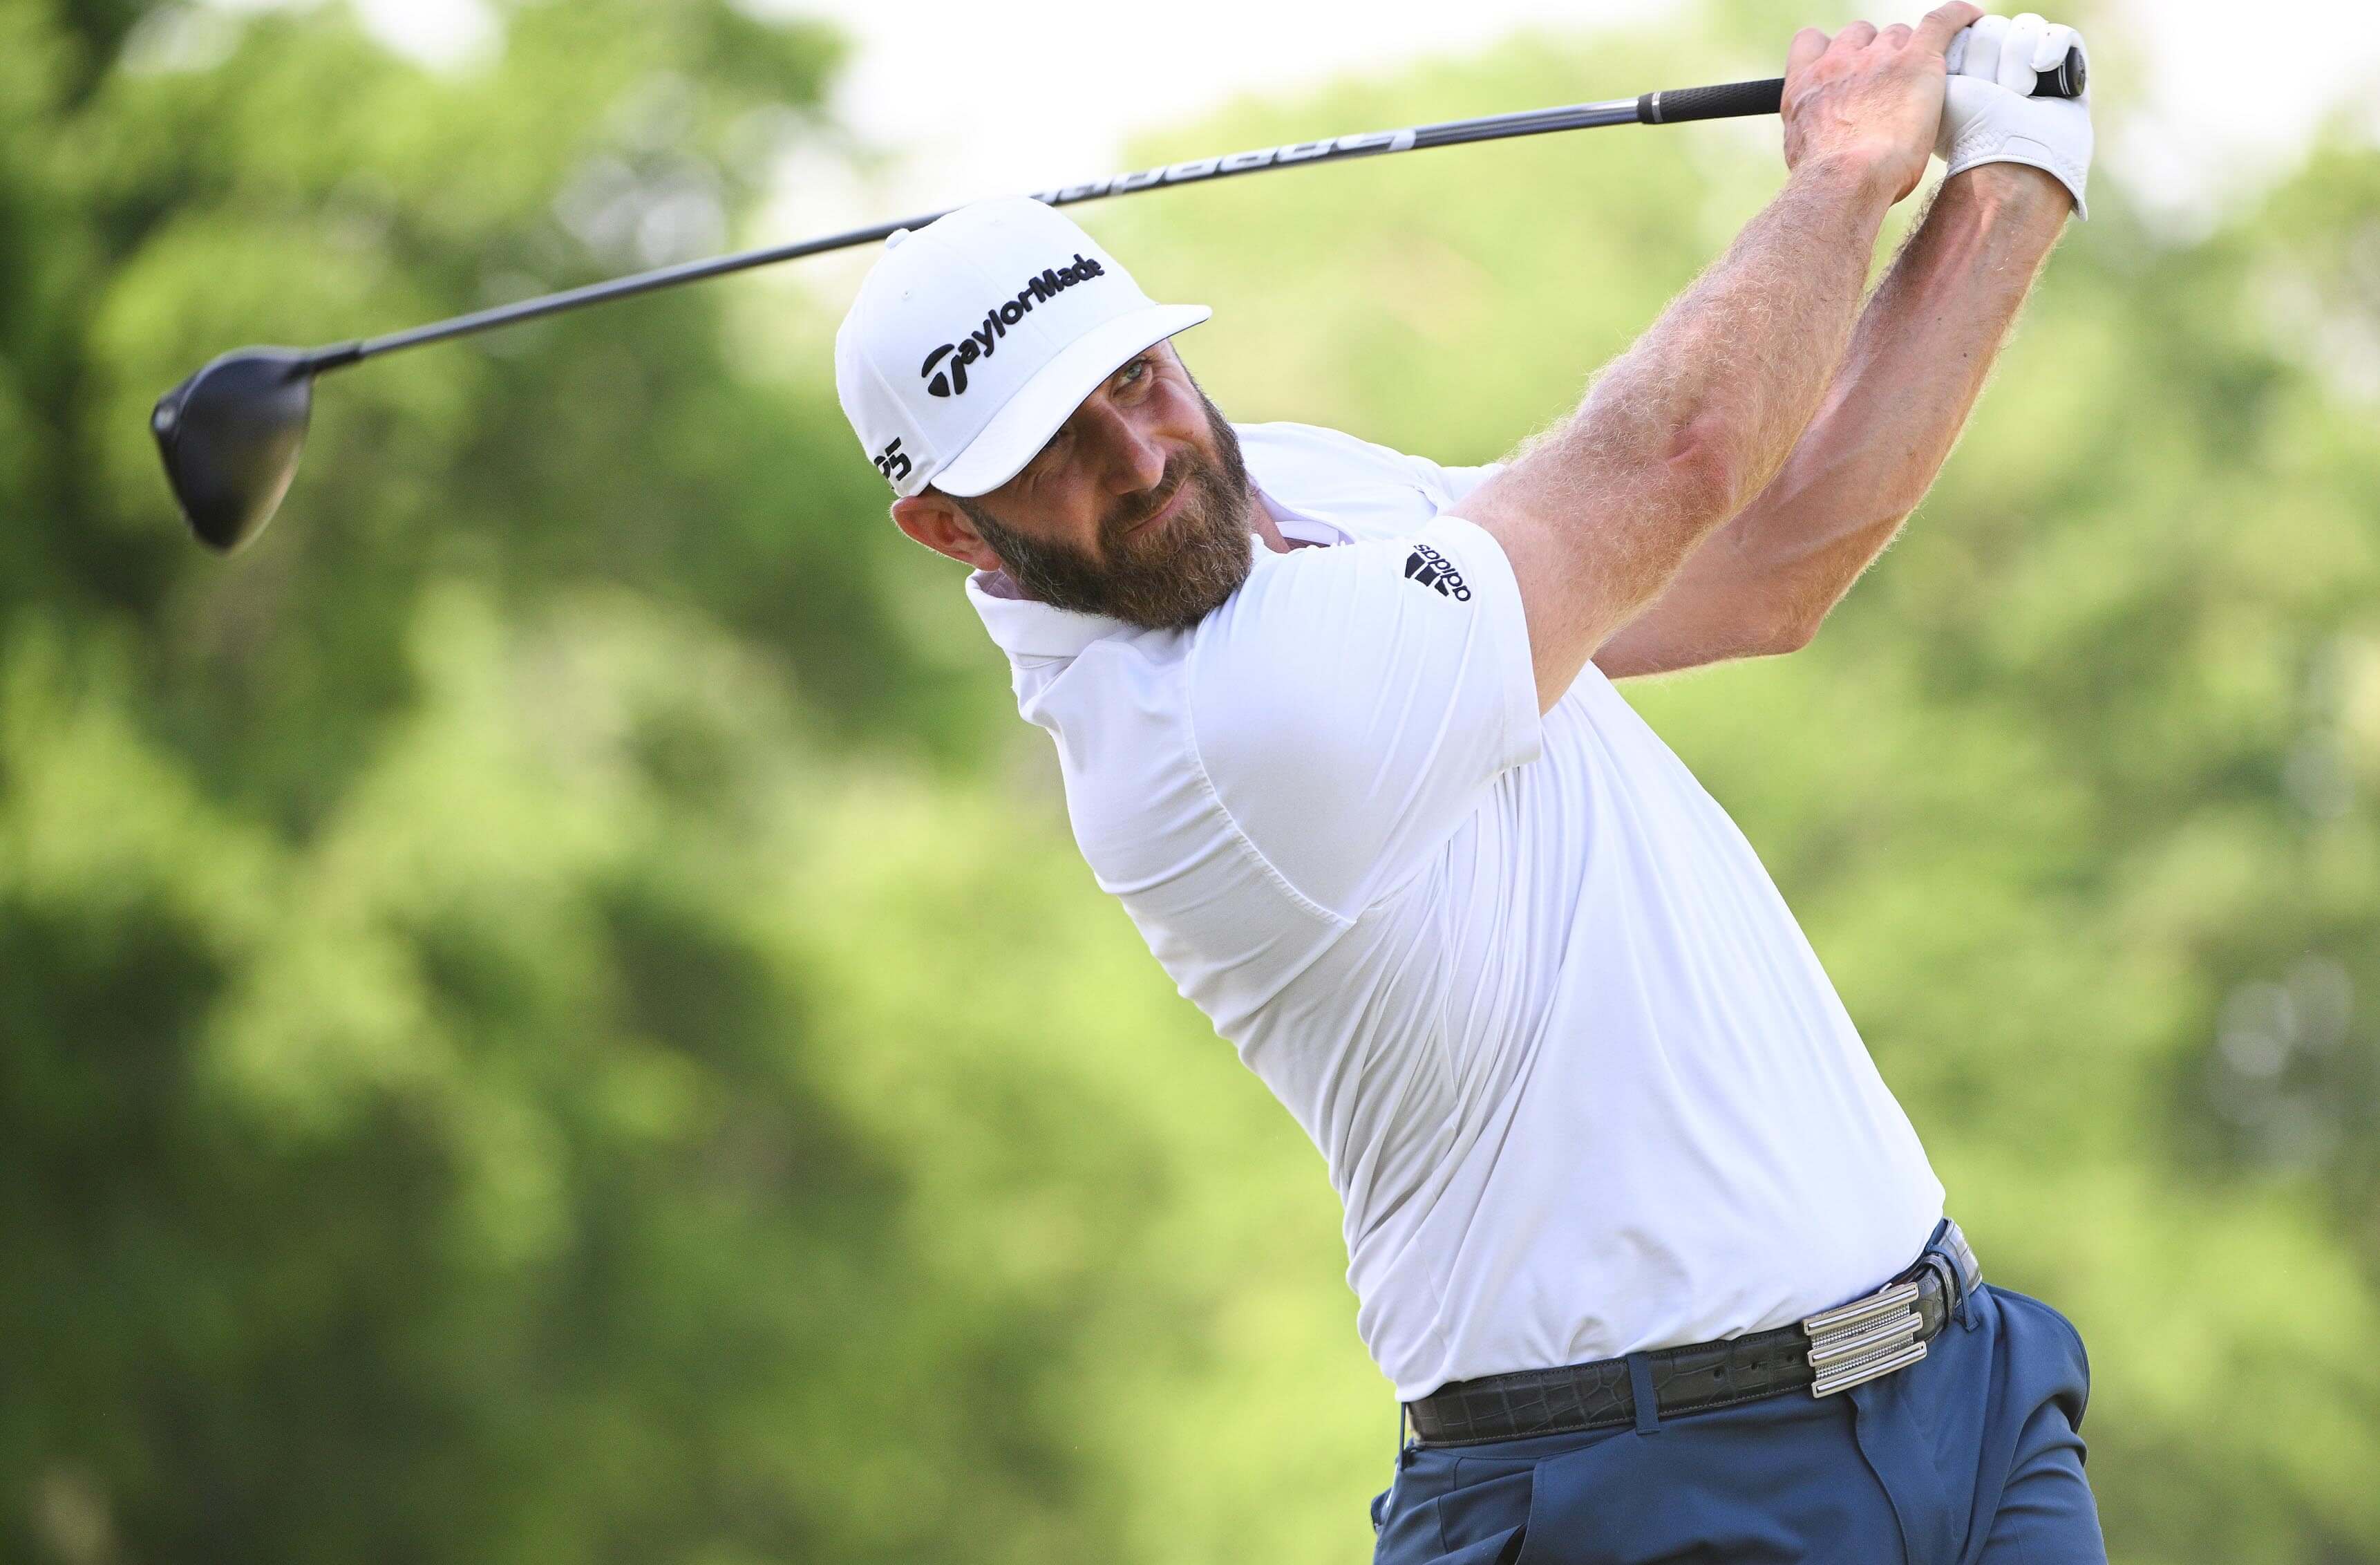 Dustin Johnson plays a shot on the ninth tee during the first round of the PGA Championship golf tournament at Southern Hills Country Club.